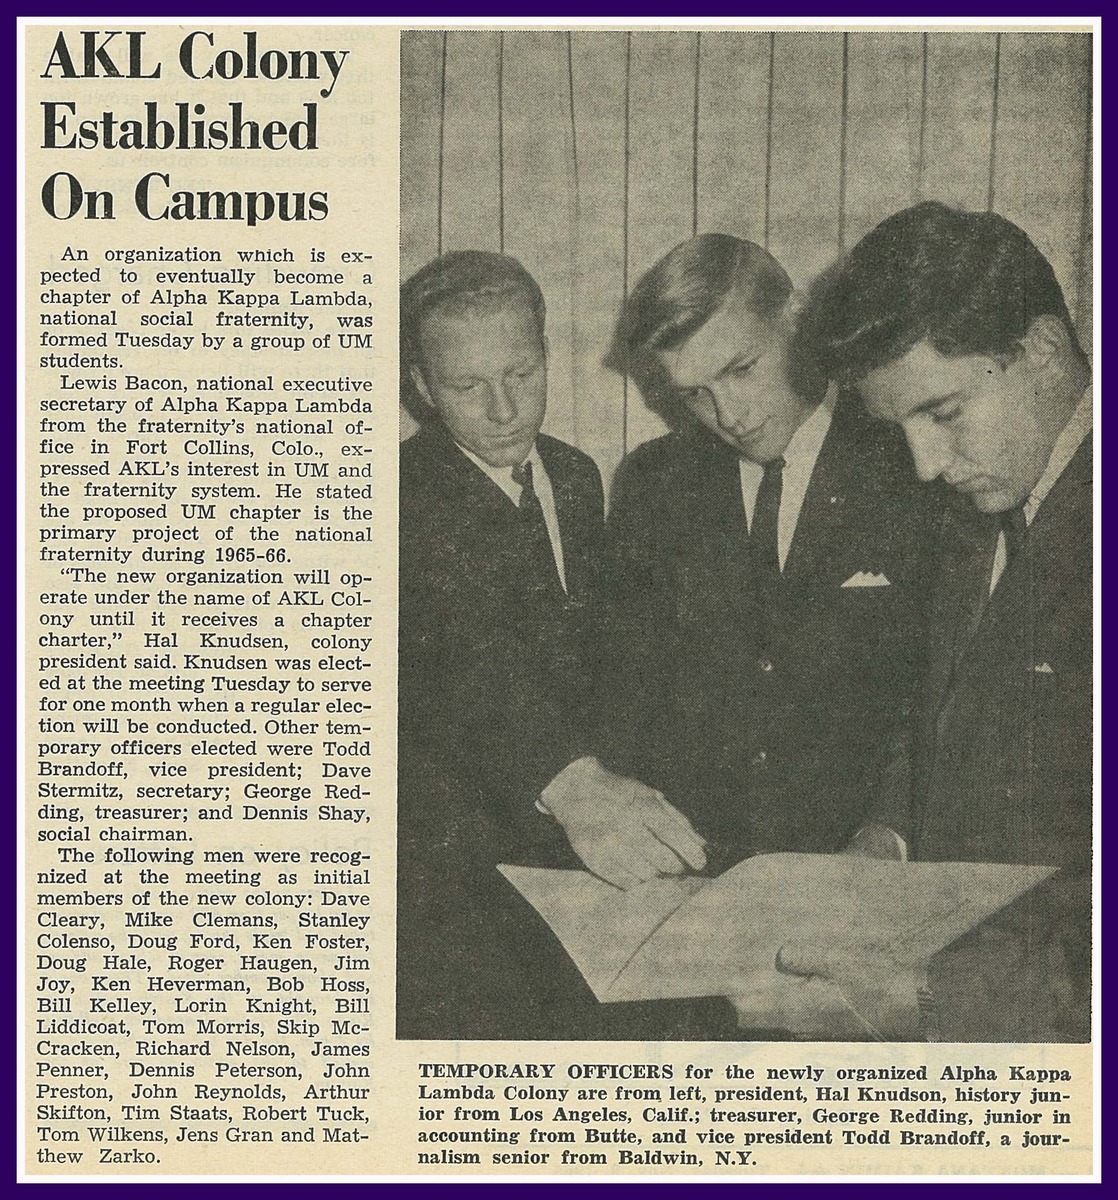 AKL Colony Established on Campus, page 1<br />
